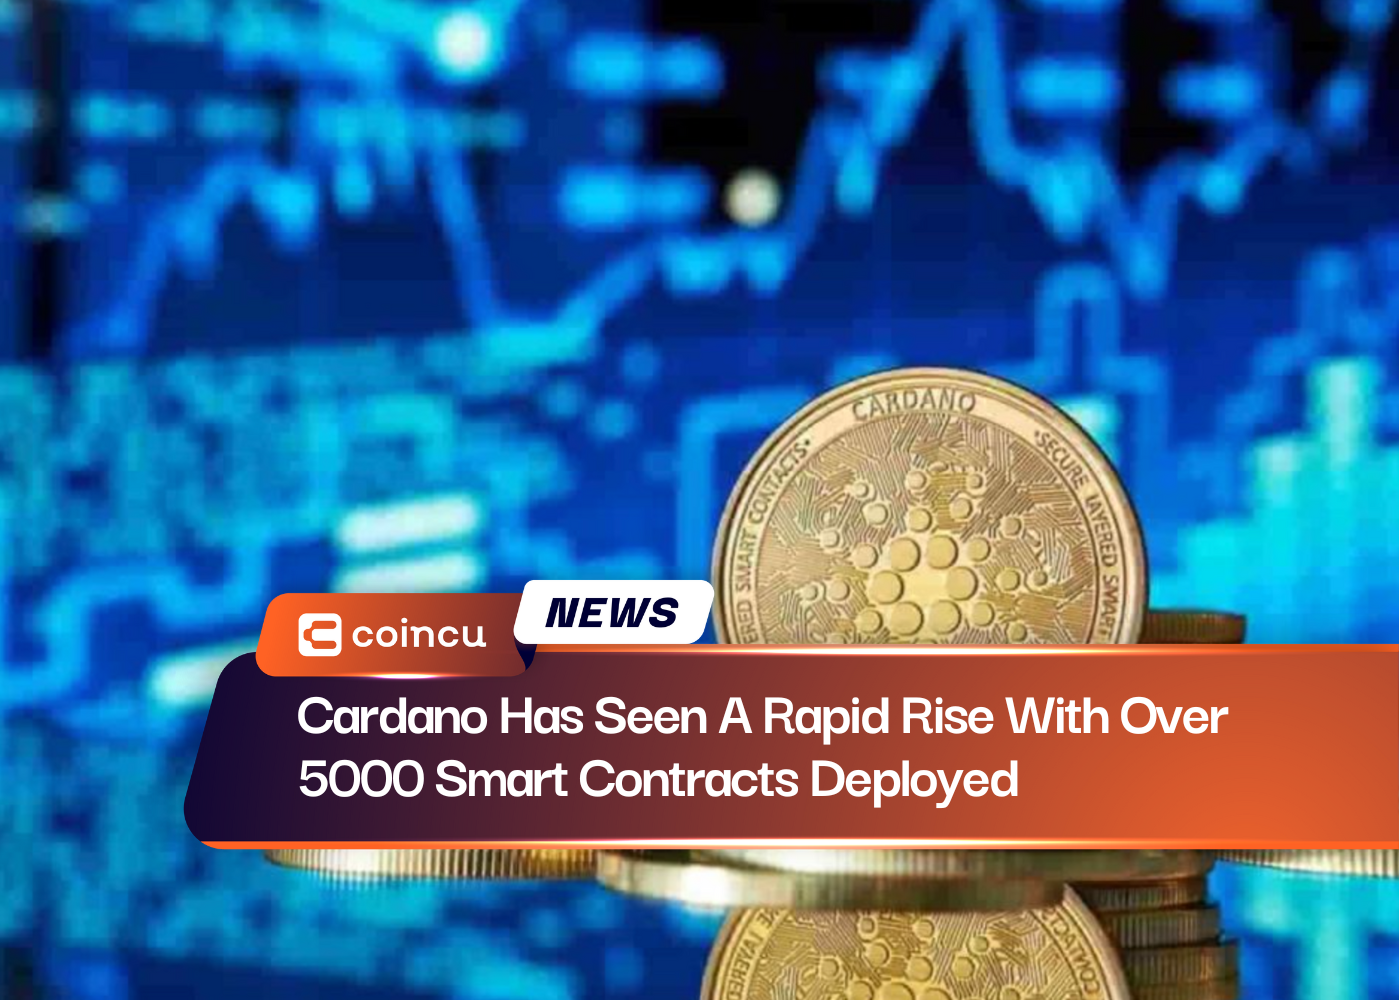 Cardano Has Seen A Rapid Rise With Over 5000 Smart Contracts Deployed  - CoinCu News